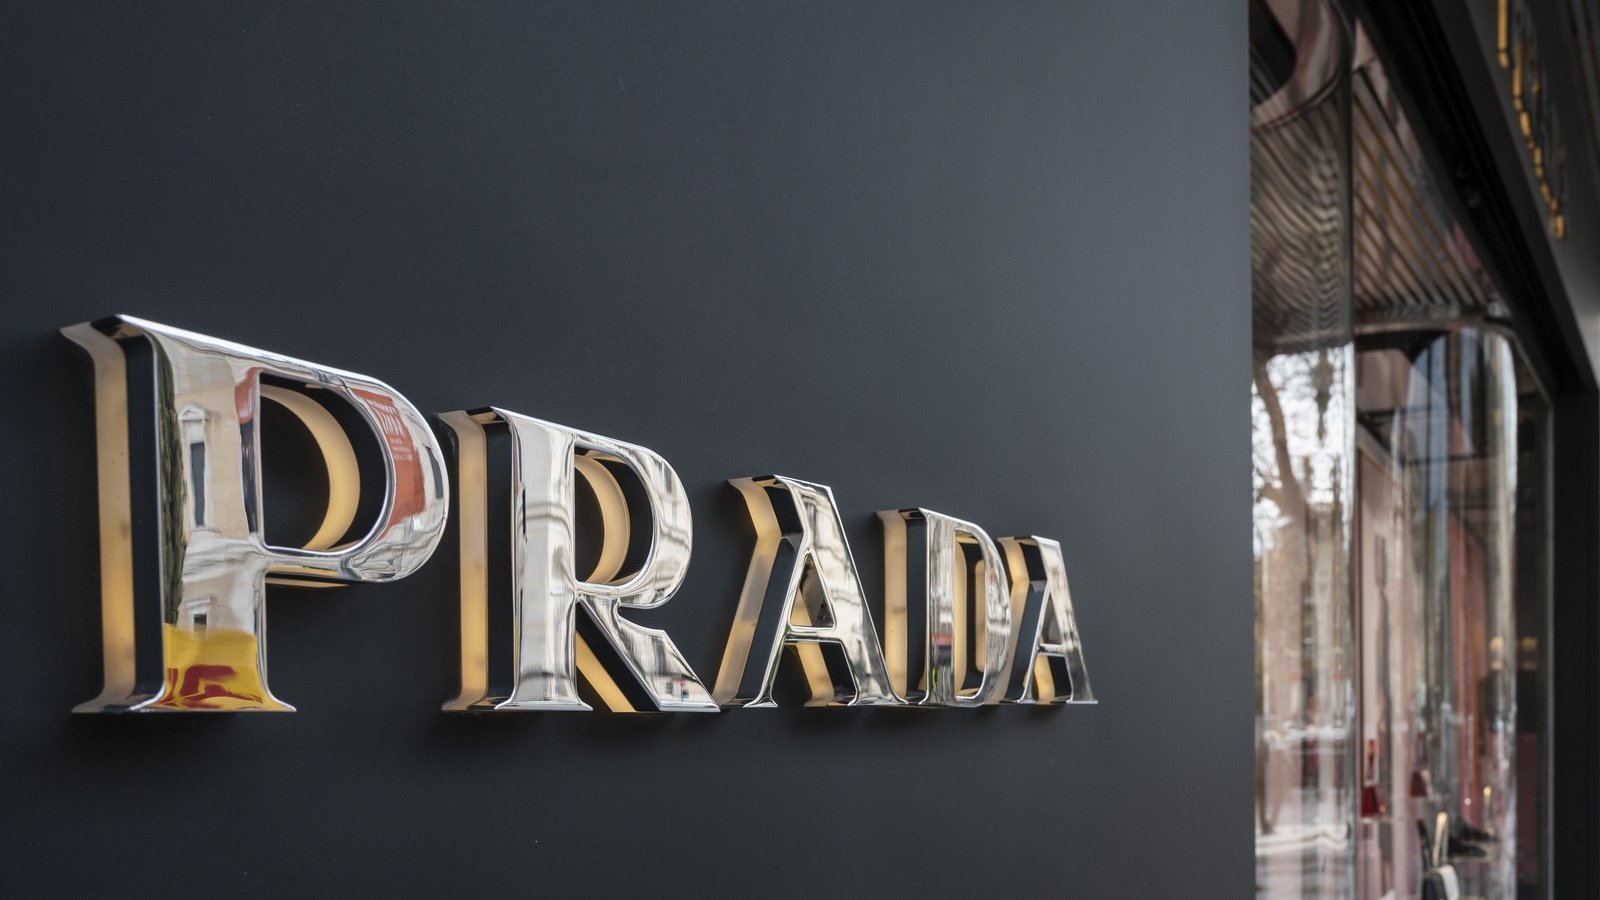 Worker claims Prada store reneged on part-time promise